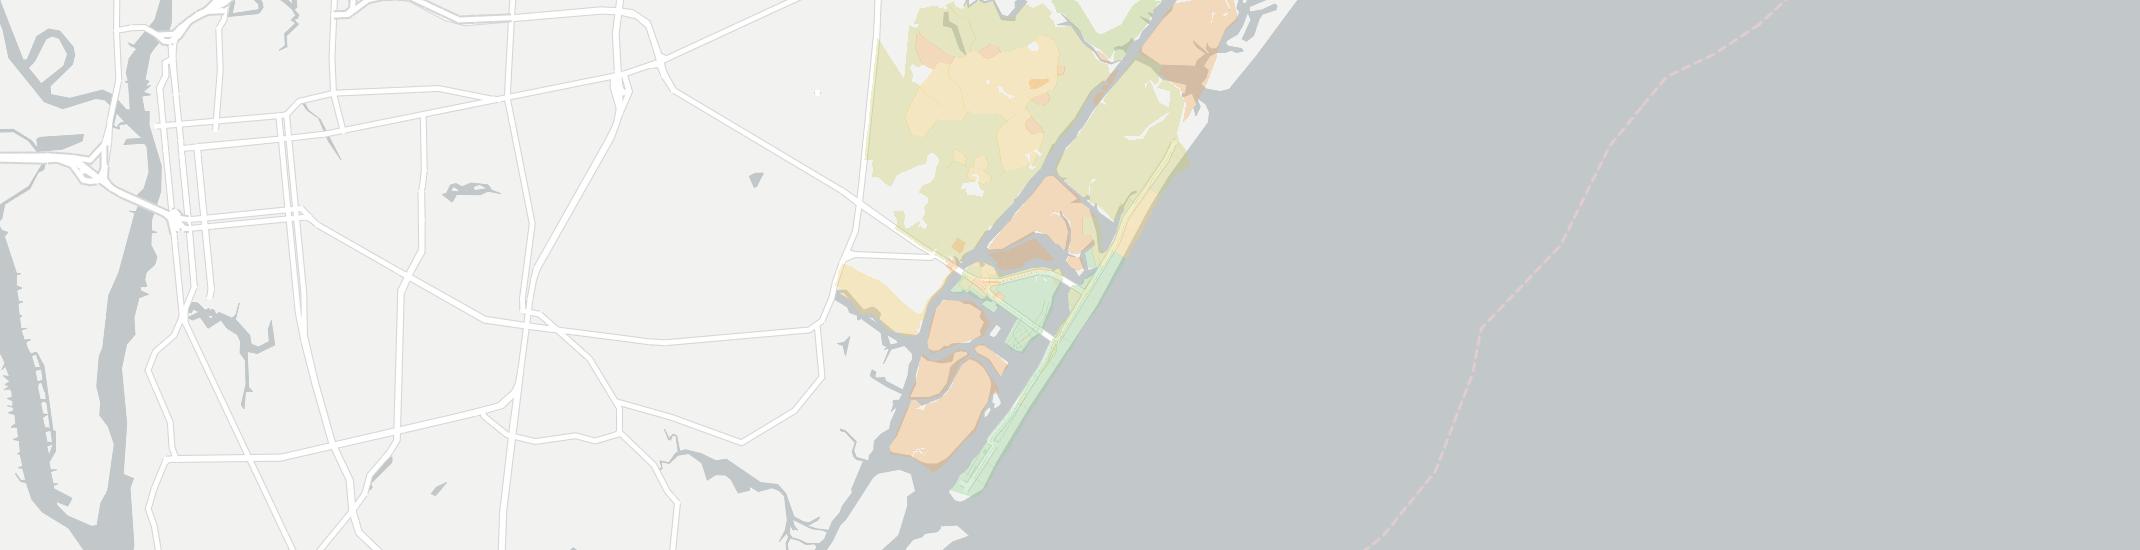 Wrightsville Beach Internet Competition Map. Click for interactive map